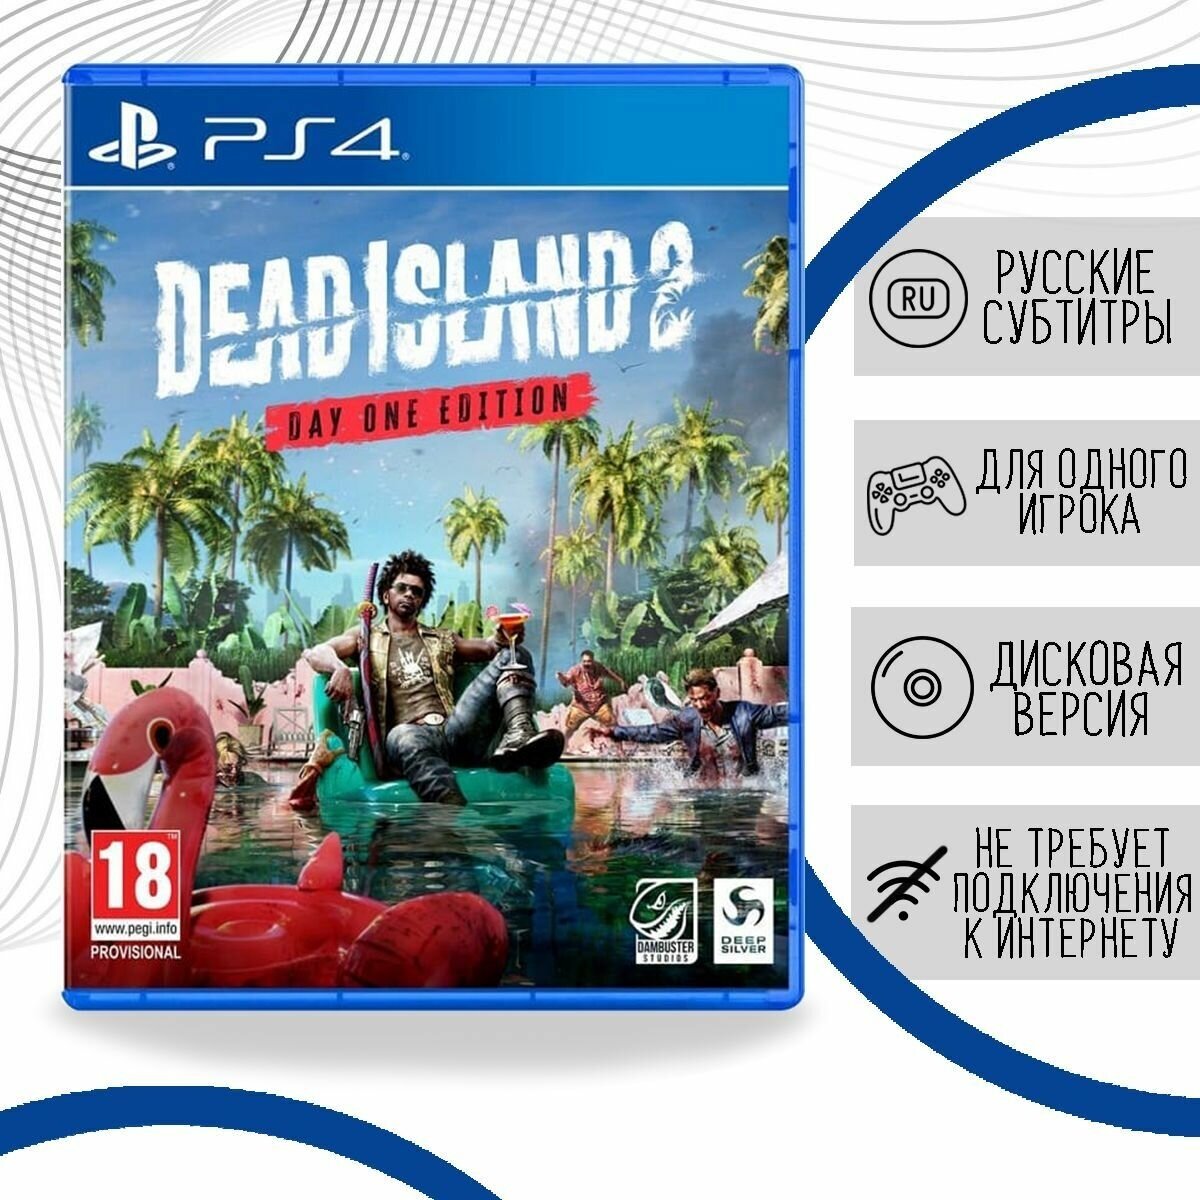 Dead Island 2 - Day One Edition (PS4 русские субтитры)